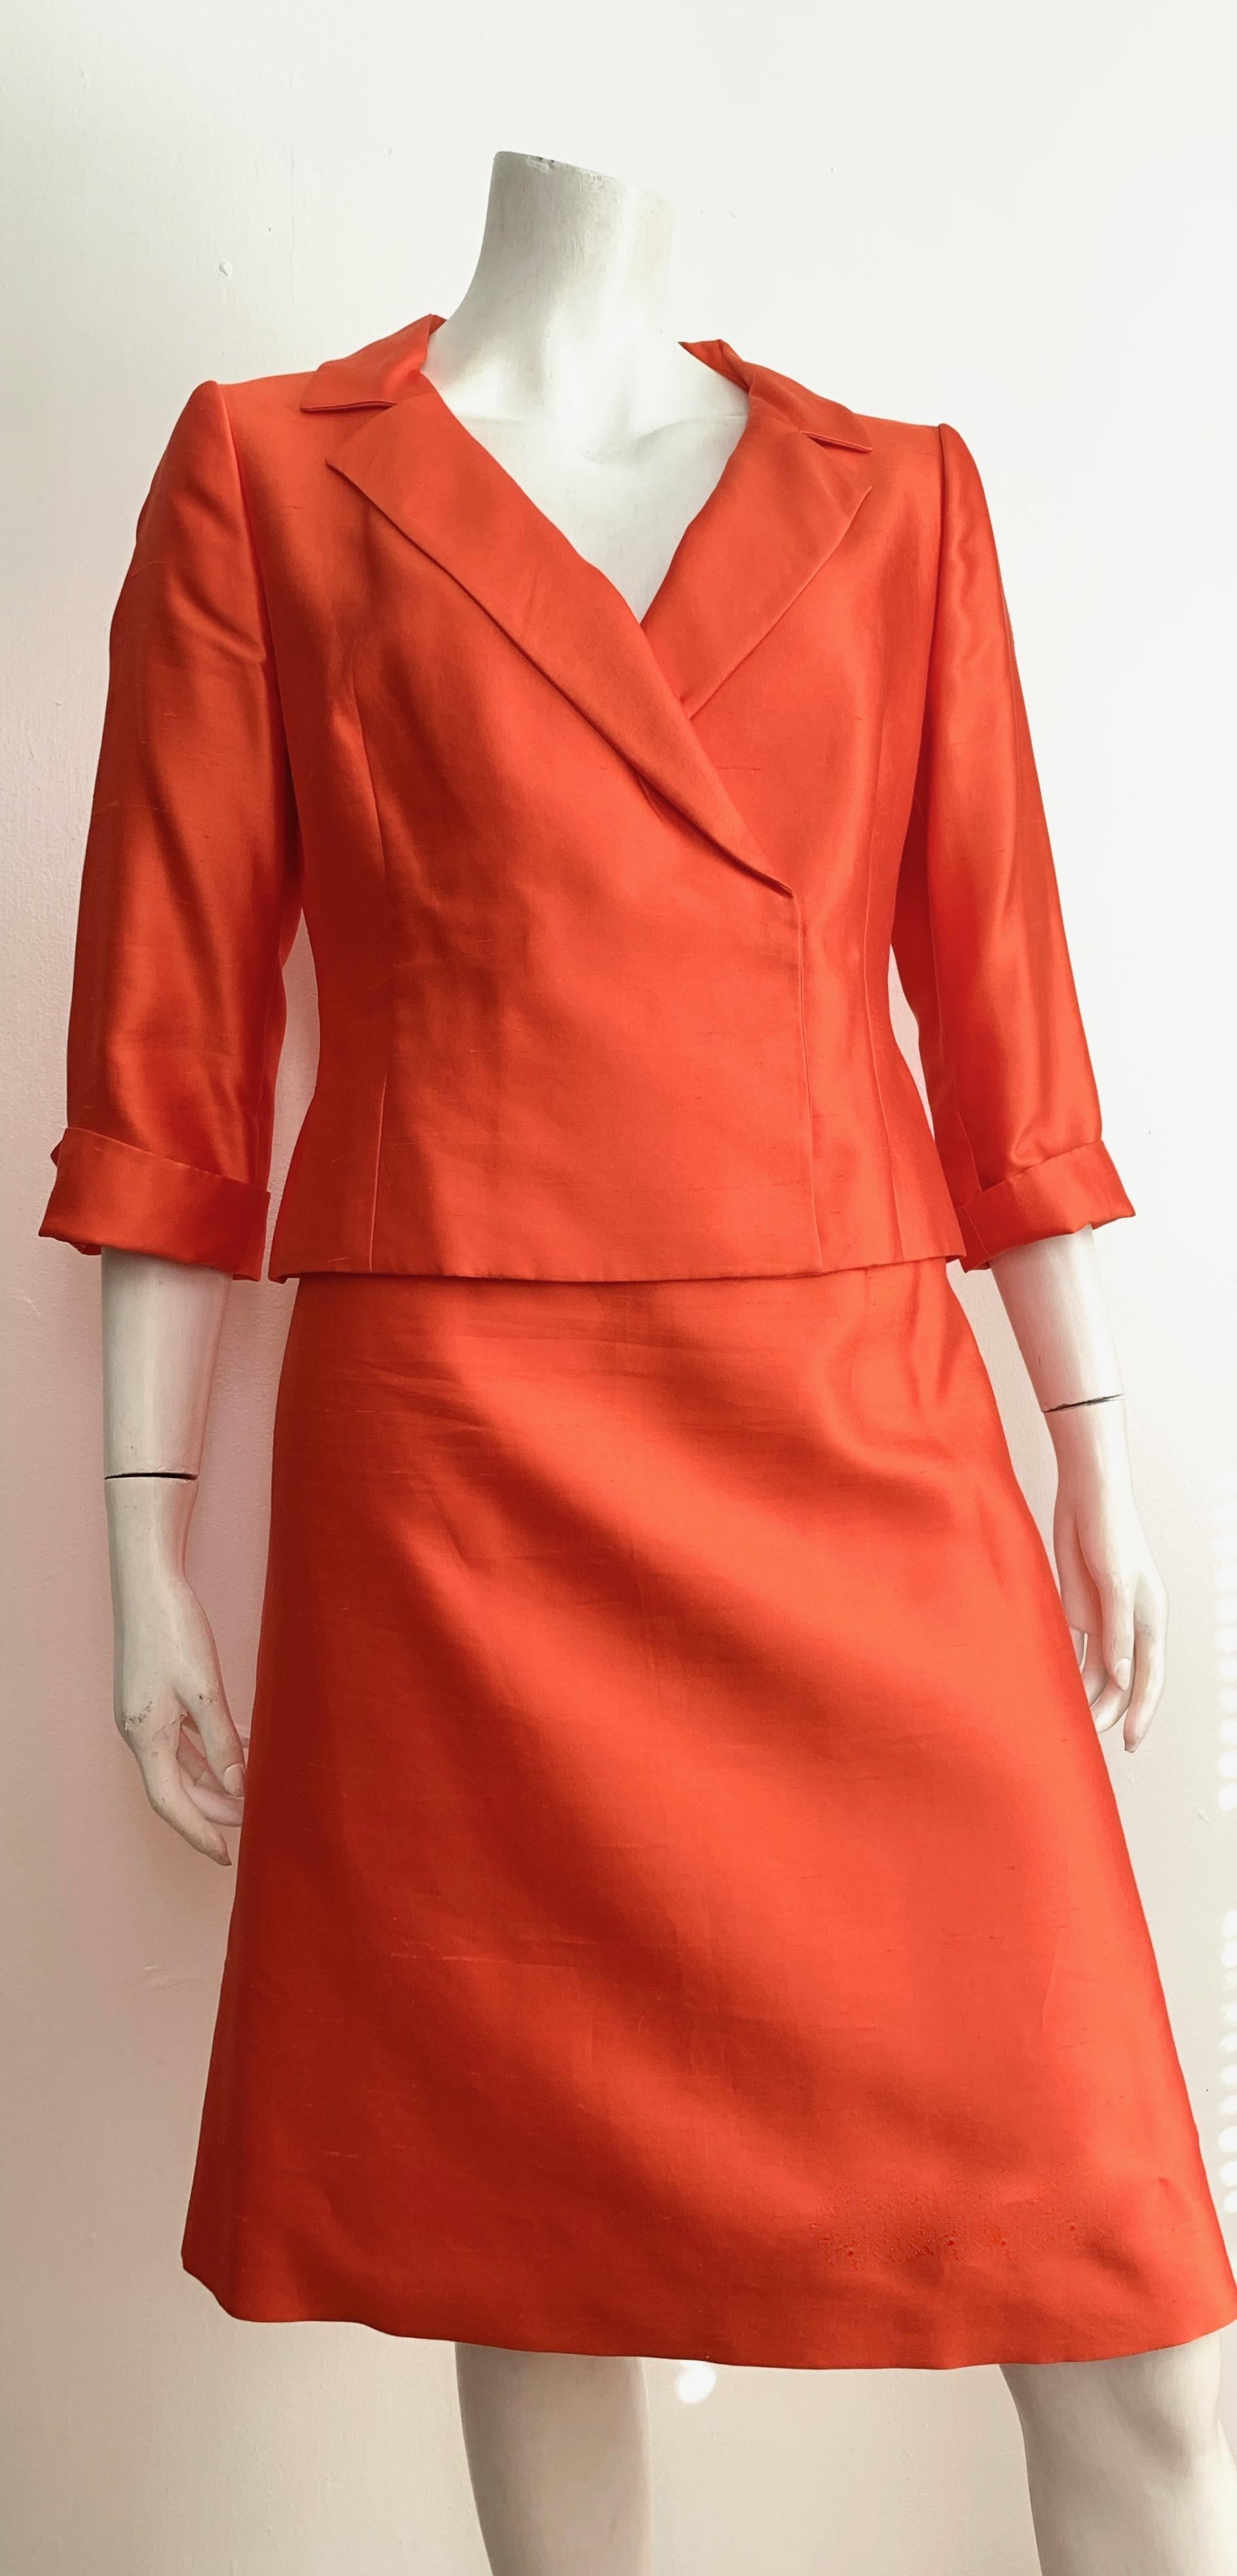 Red Valentino Silk Orange Skirt Suit Size 10. For Sale